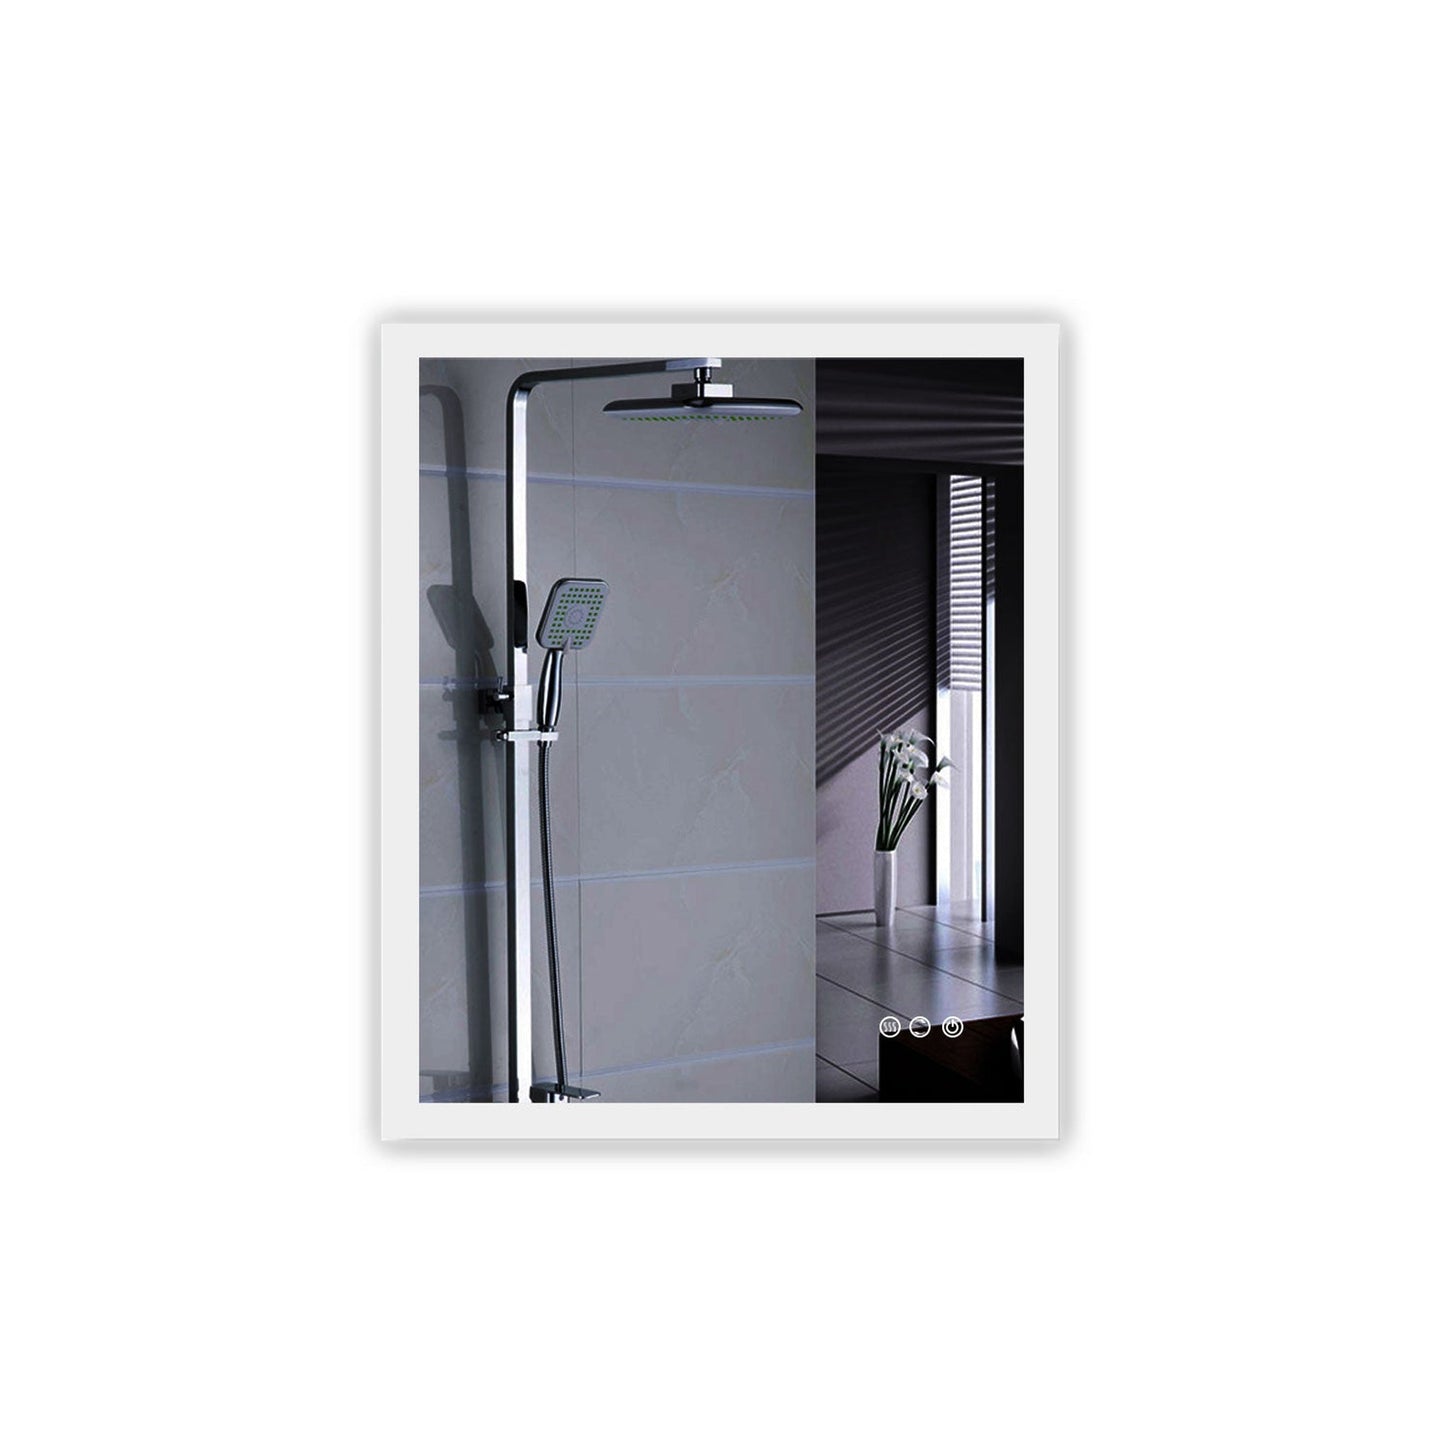 ExBrite Second Generation 30" x 36" Frameless LED Backlit Super Slim Bathroom Vanity Mirror With Night Light, Anti Fog, Dimmer, Touch Button and Waterproof IP44